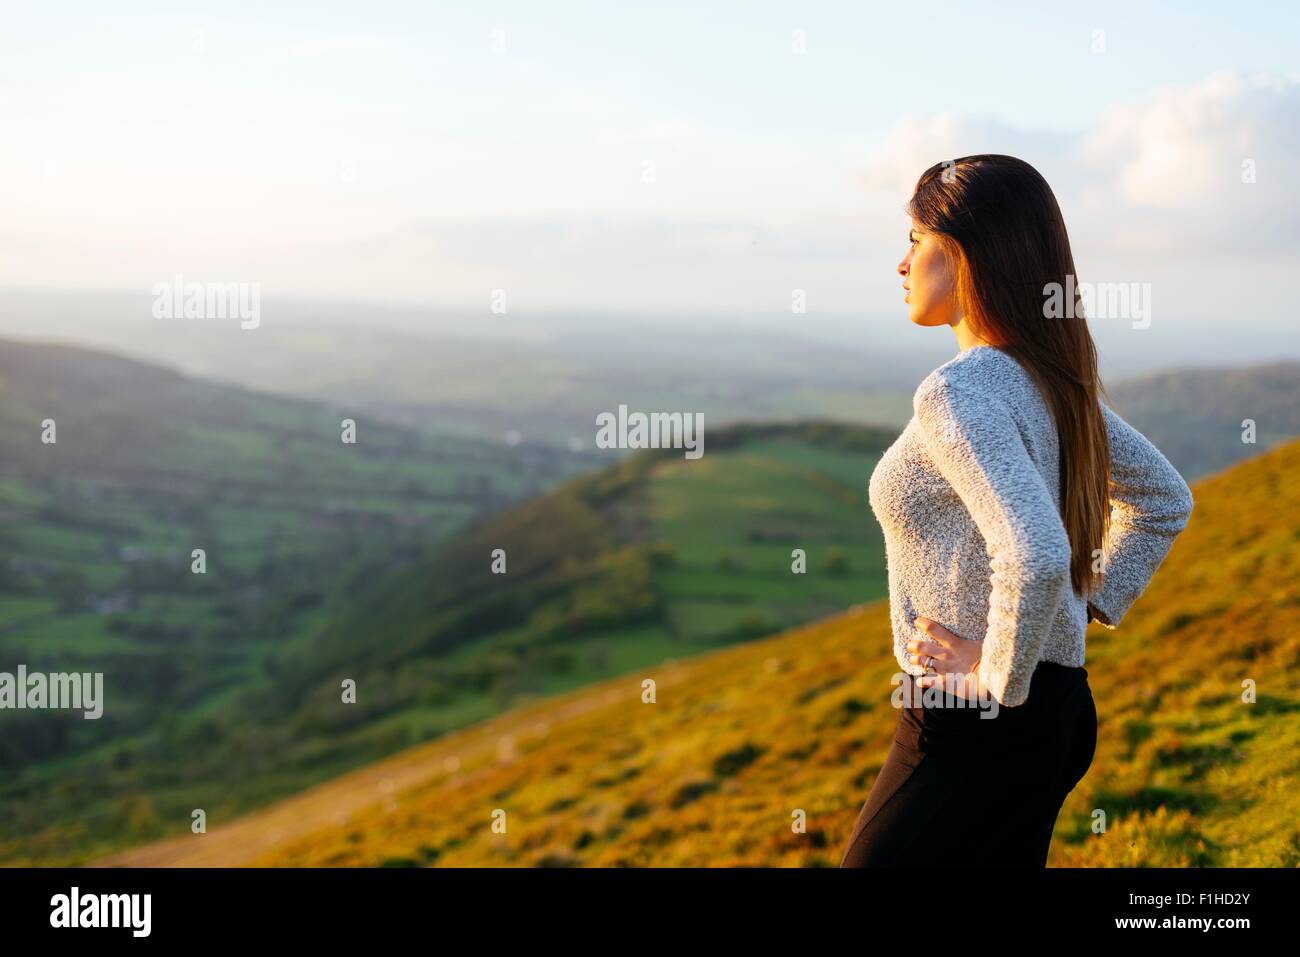 Rear view of young woman looking out over Glyn Collwn valley, Brecon Beacons, Powys, Wales Stock Photo